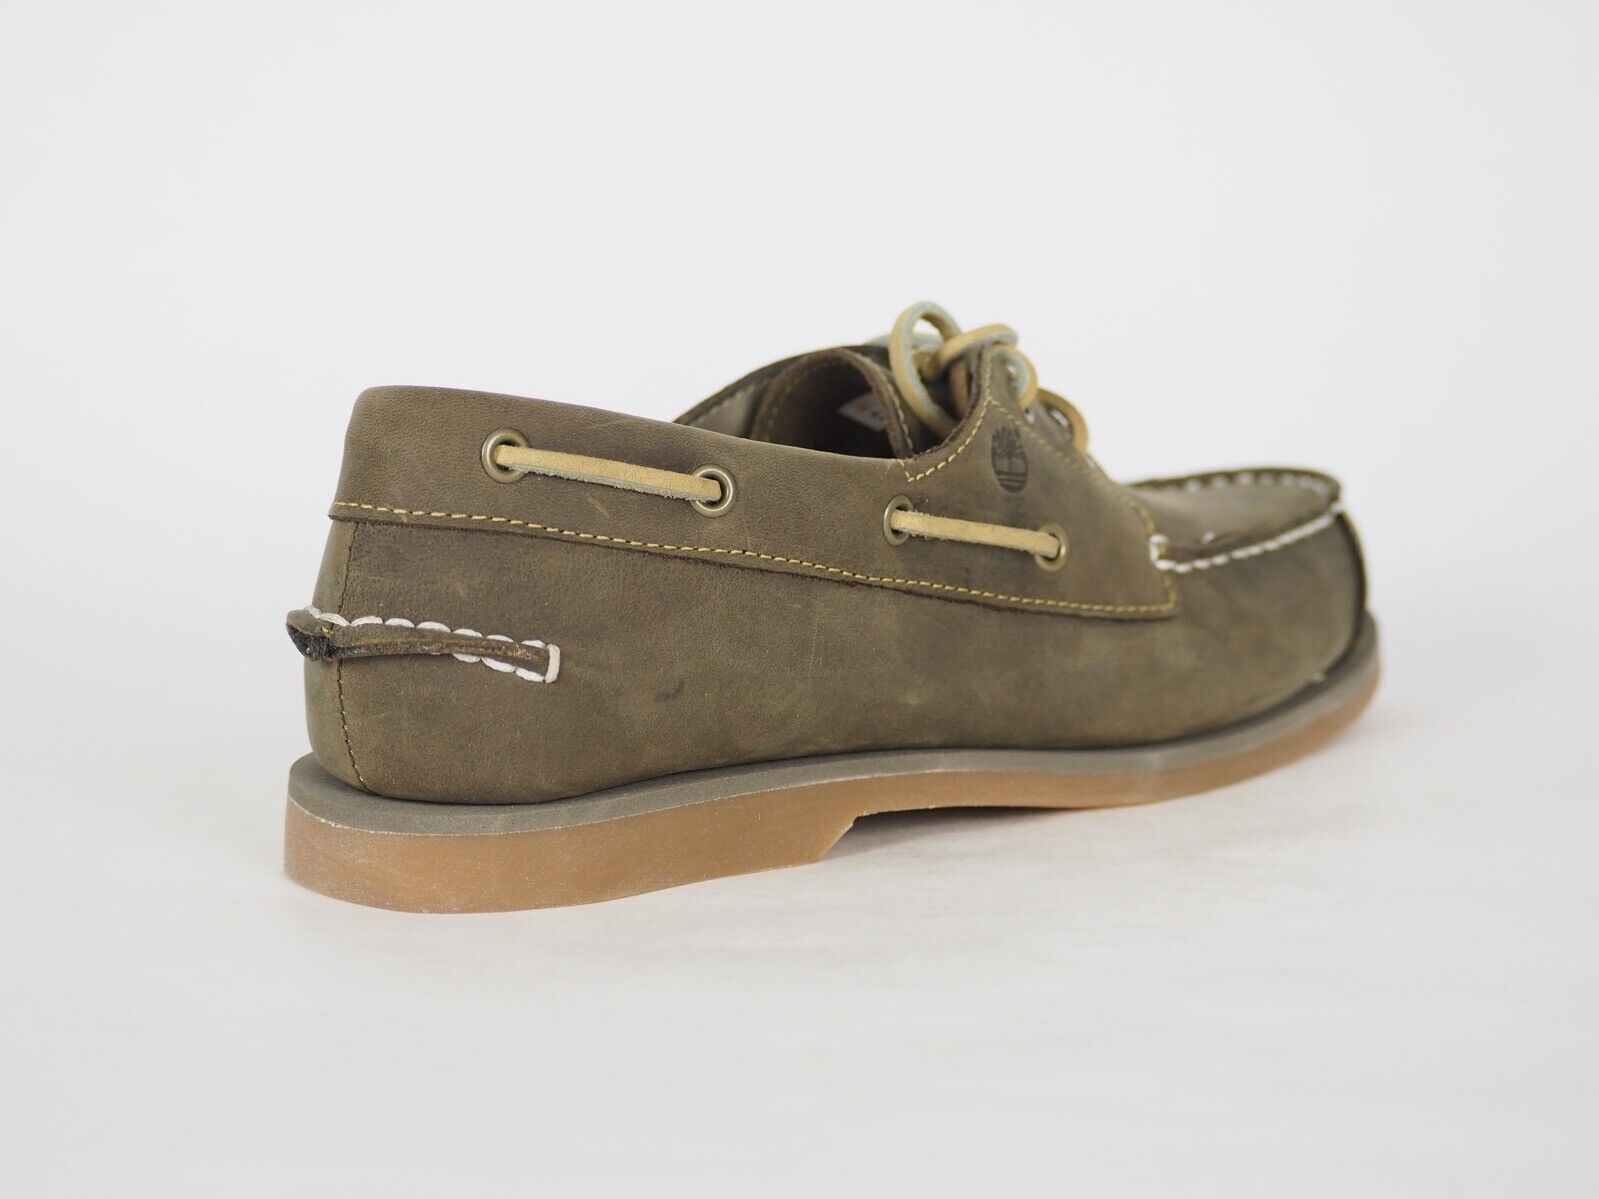 Juniors Timberland Peakisl 4691R Olive Leather 2 Eye Lace Up Casual Boat Shoes - London Top Style